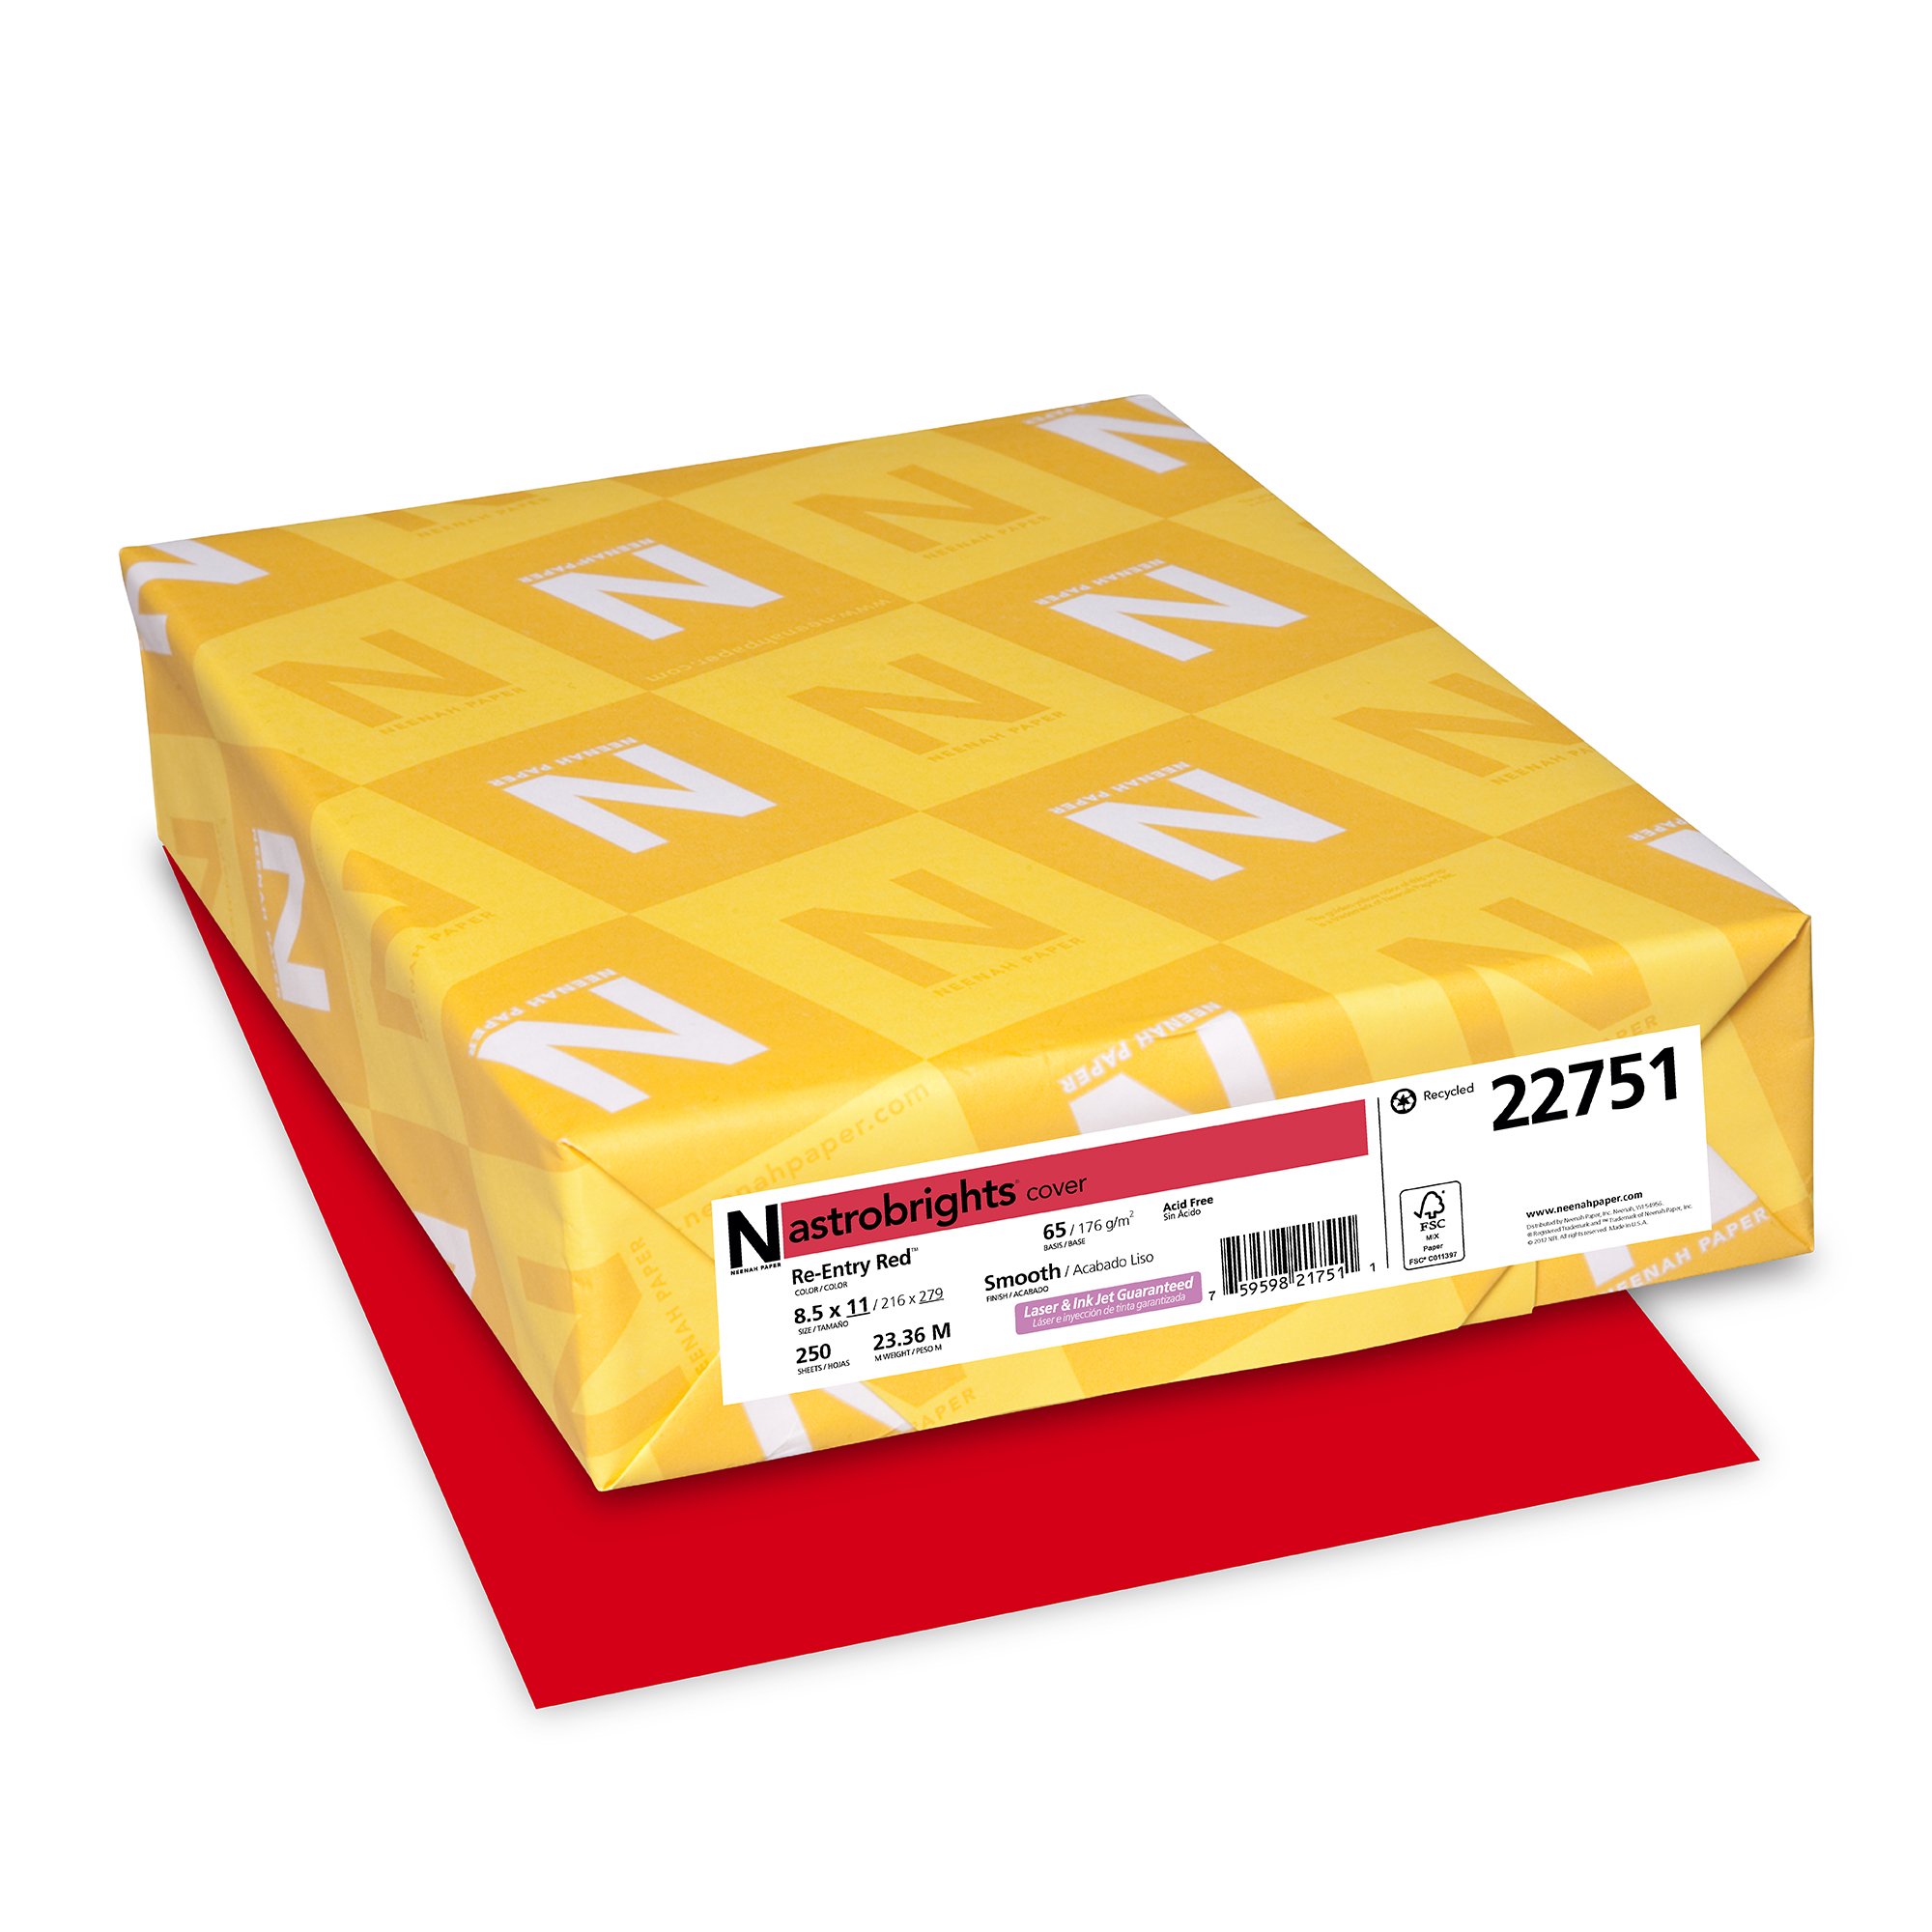 Book Cover Neenah Astrobrights Premium Color Card Stock, 65 lb, 8.5 x 11 Inches, 250 Sheets, Re-Entry Red